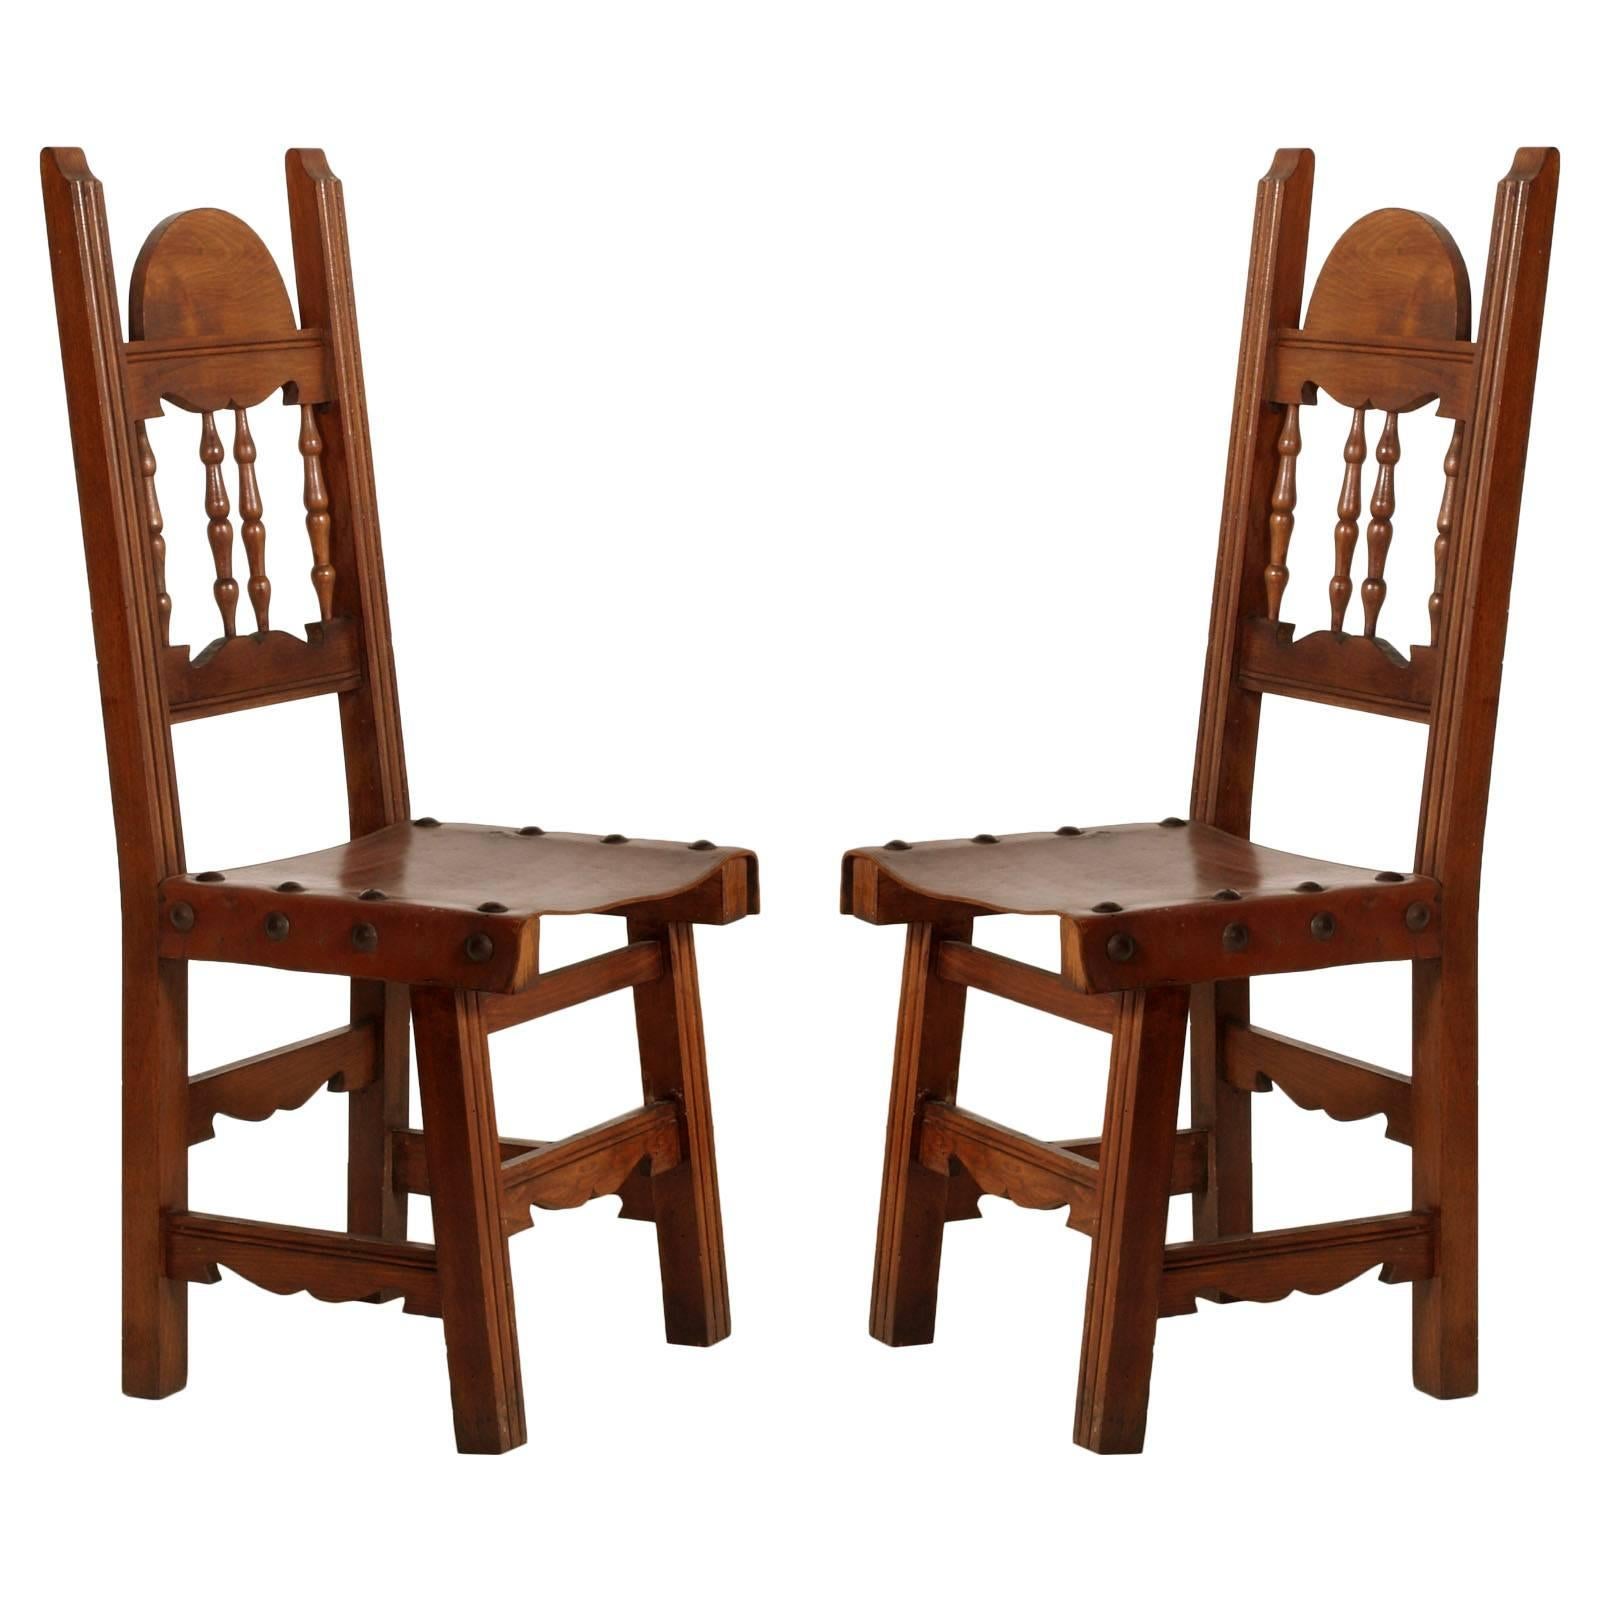 Early 20th C. Renaissance Couple Chairs in Solid Walnut and Leather , Restored